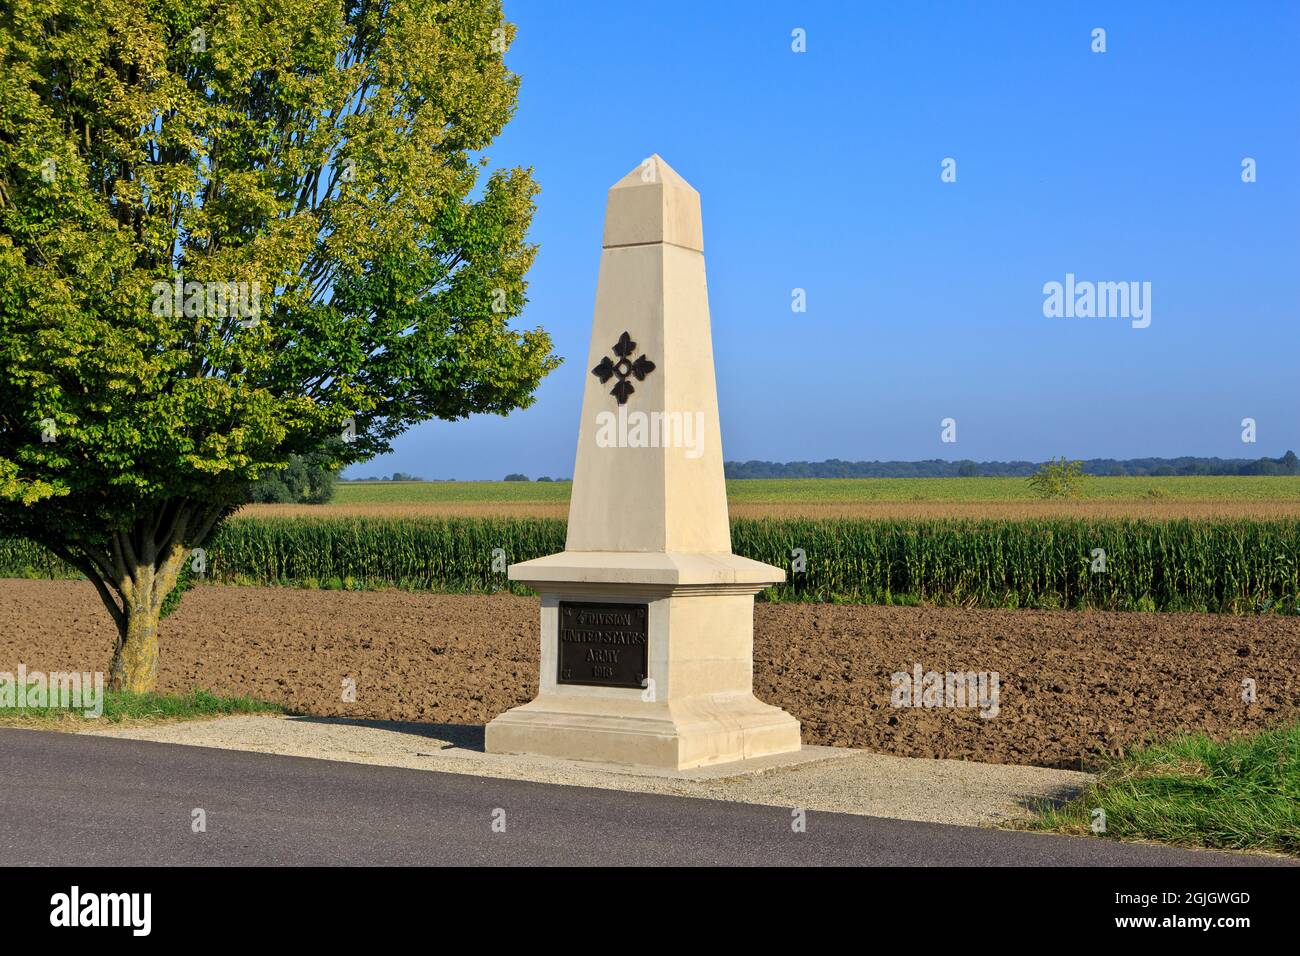 The 4th Division Saint Mihiel Monument in Manheulles (Meuse), France Stock Photo